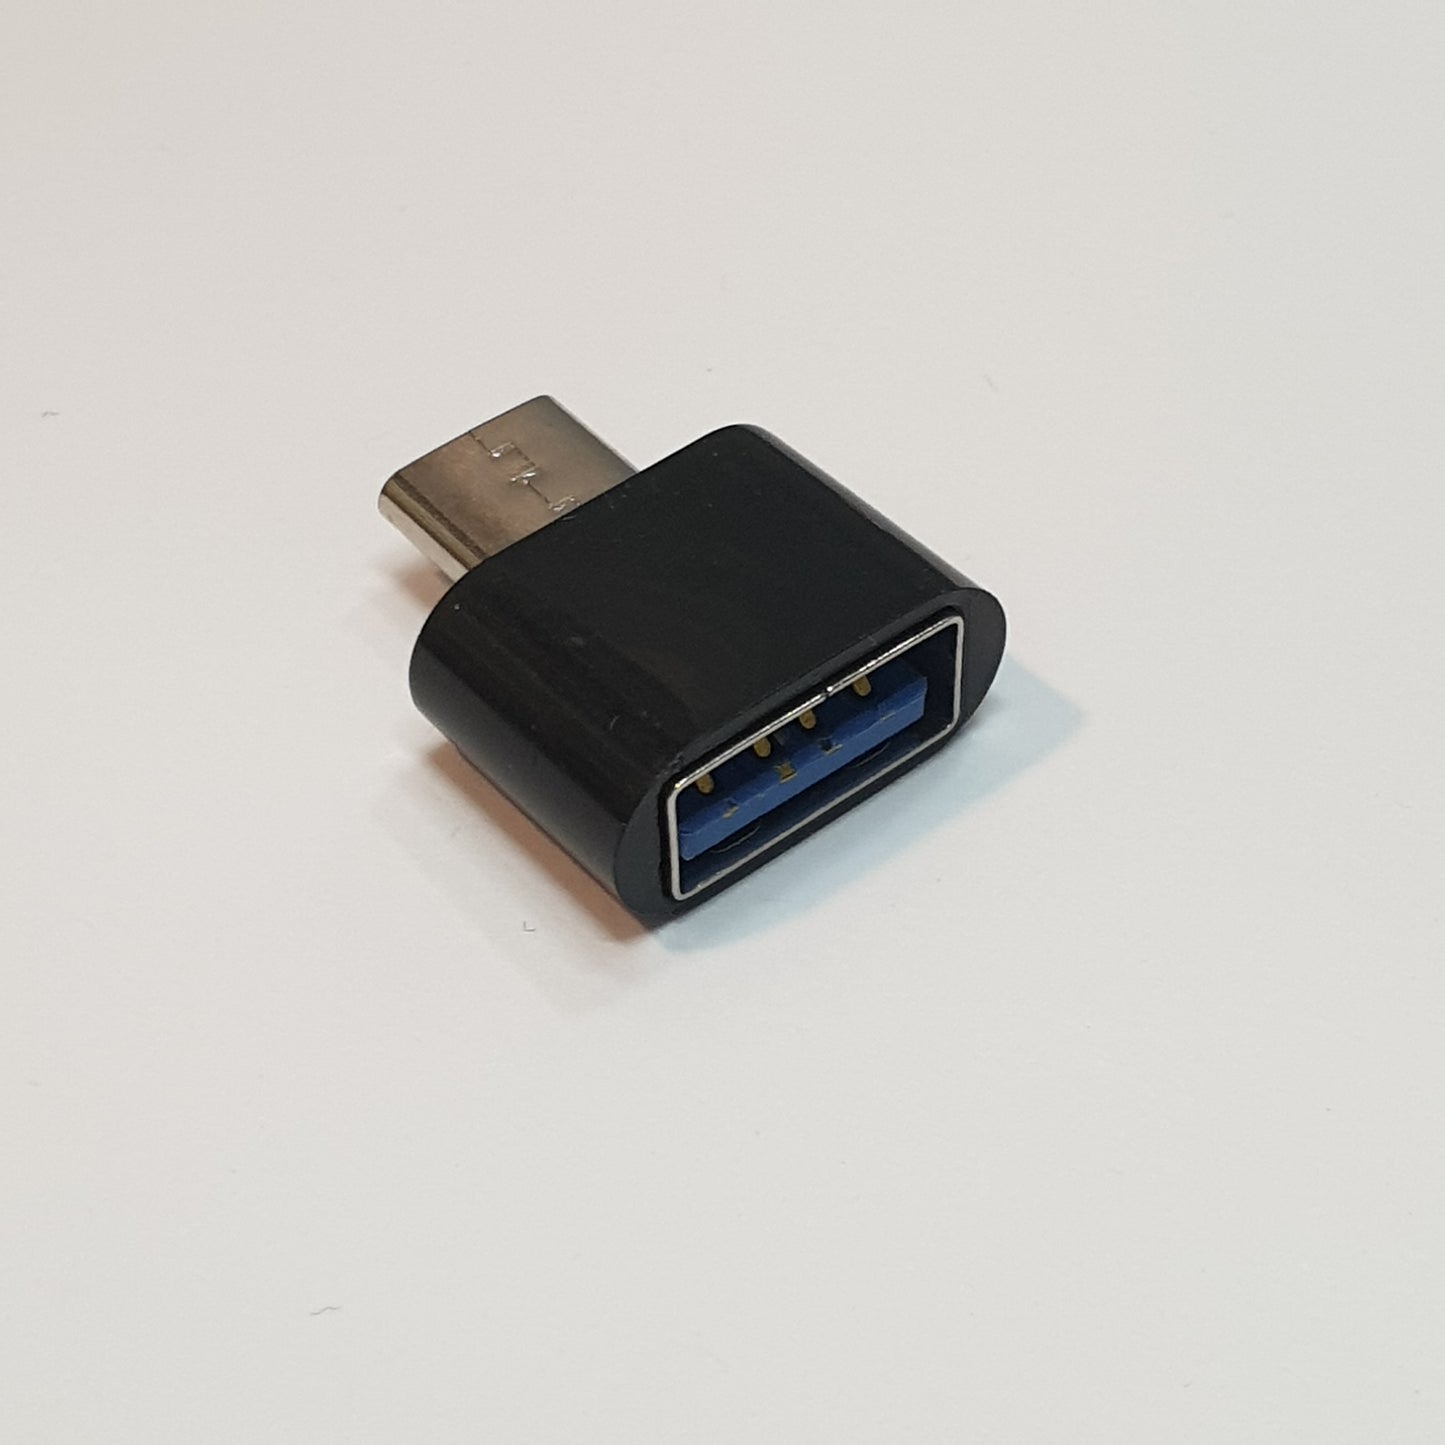 USB to USB-C Male Converter Adapter